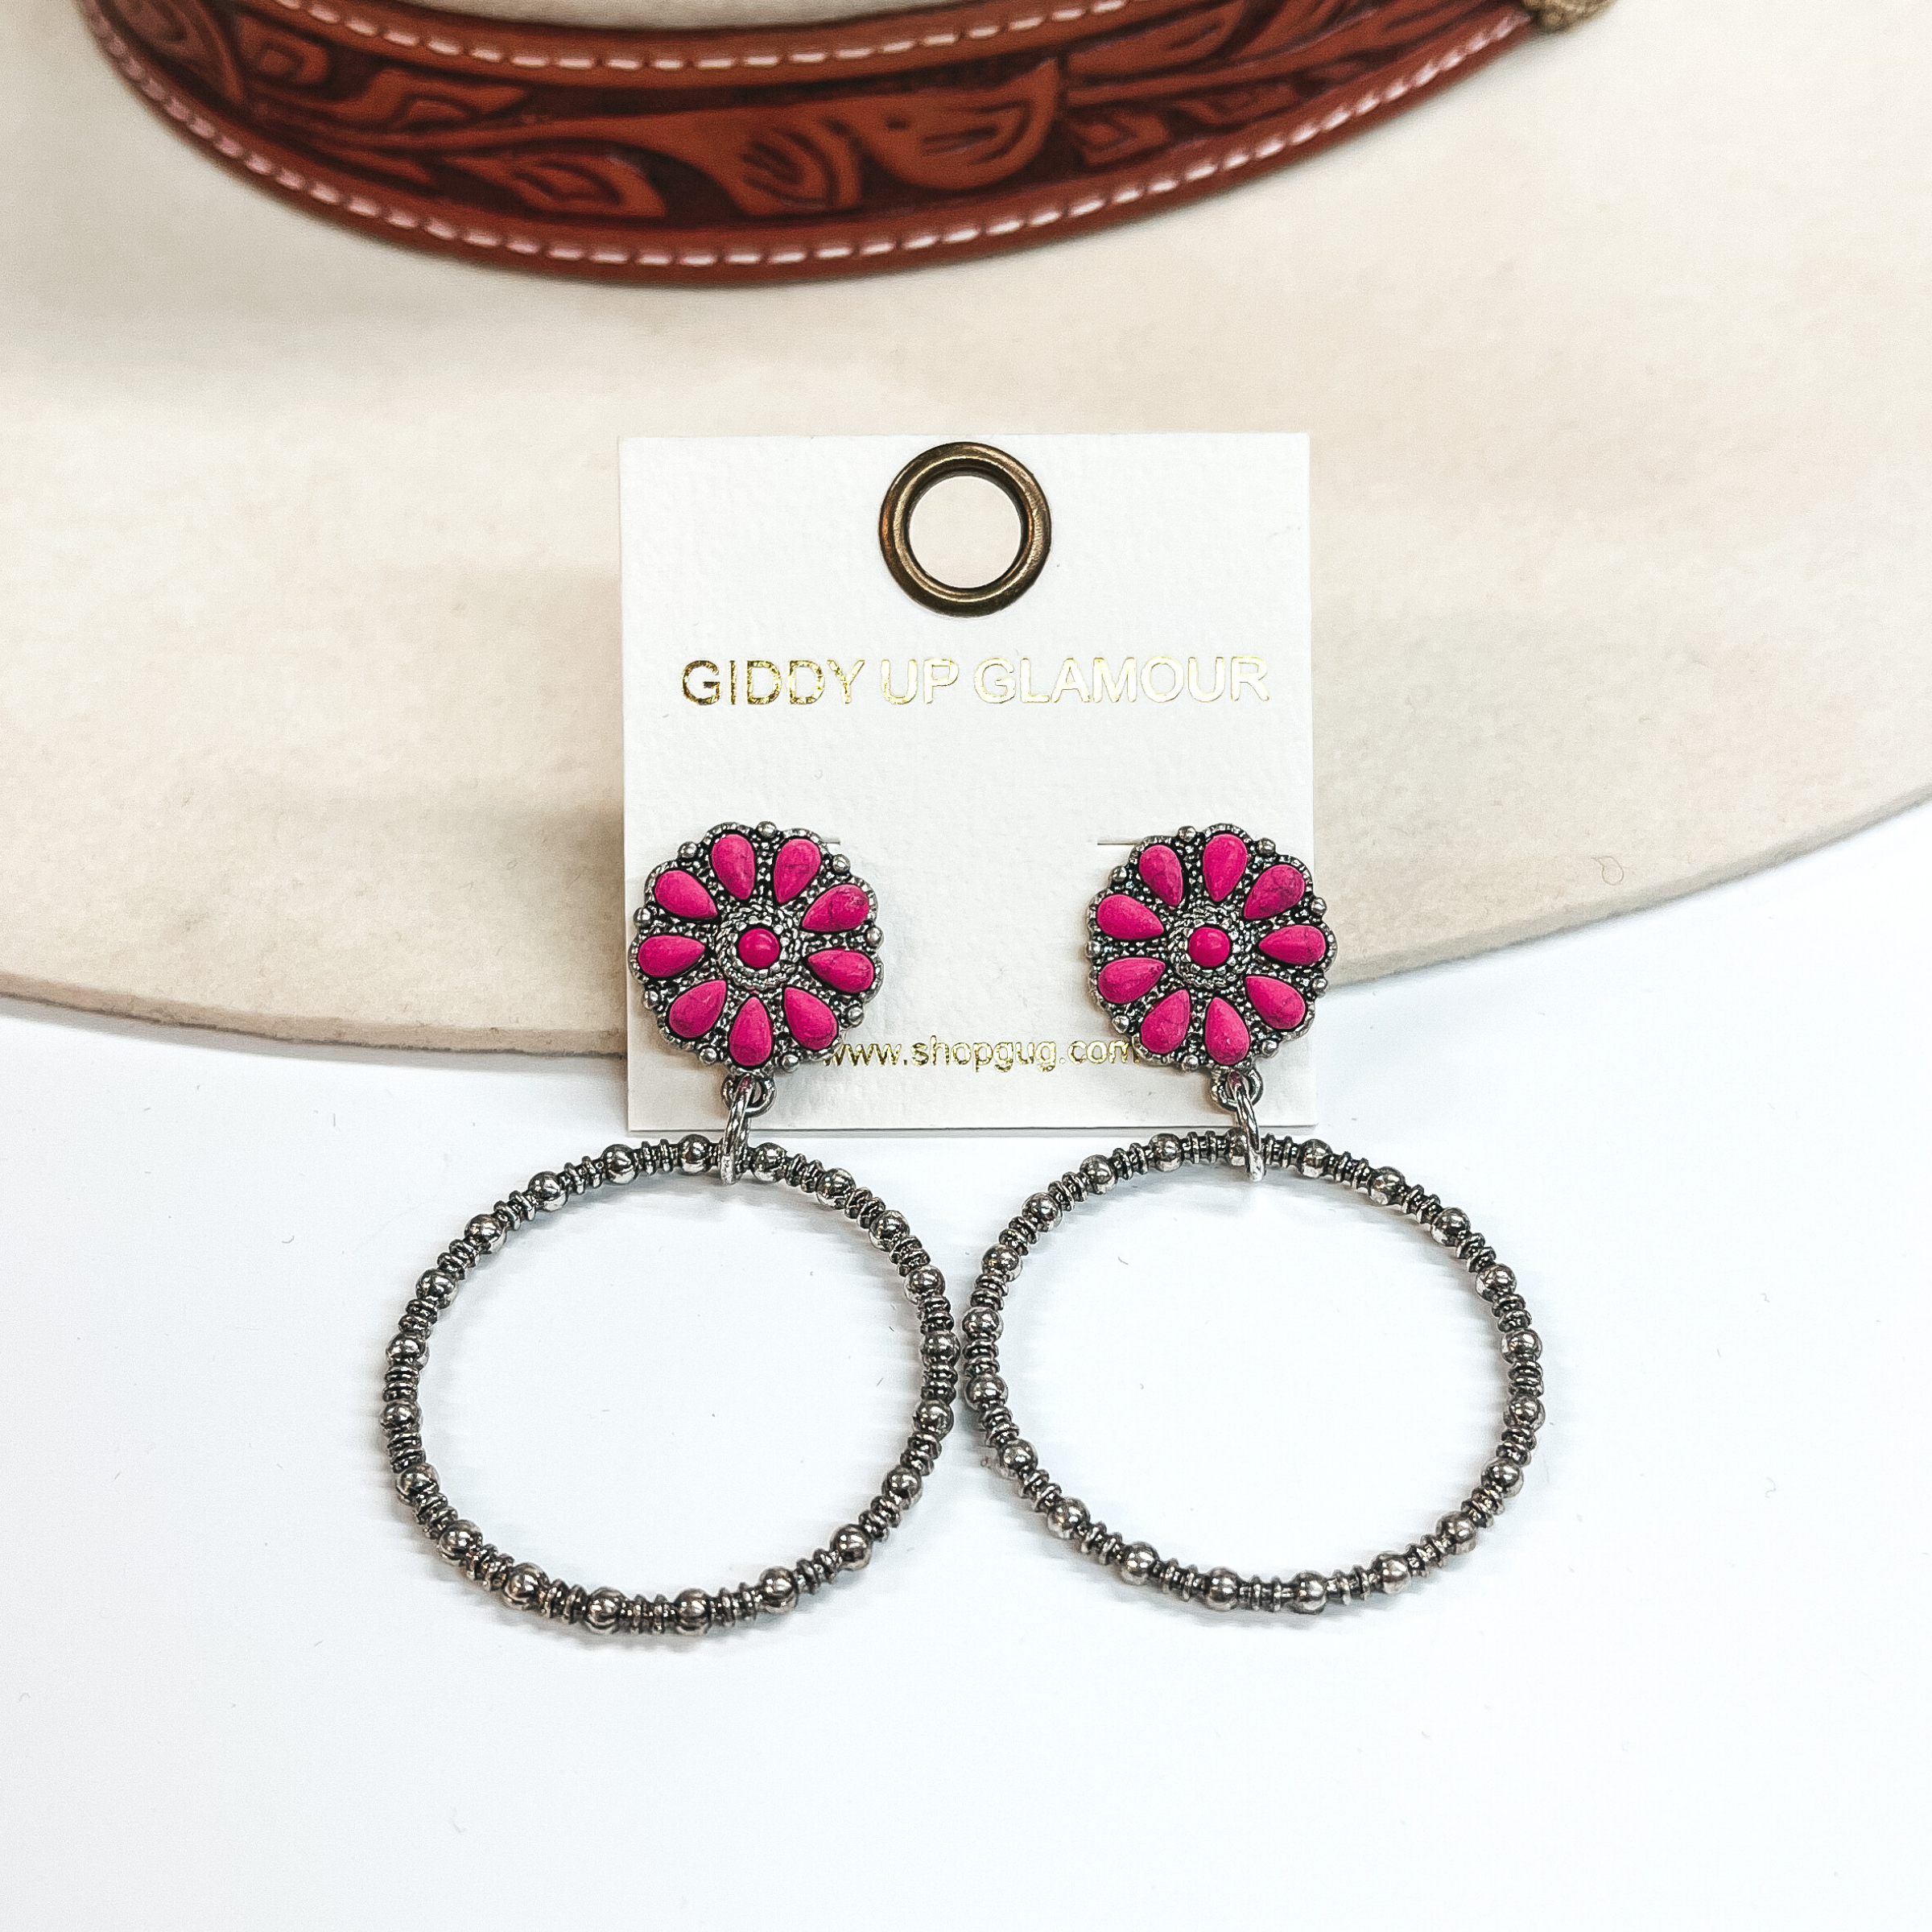 Sway to the Music Circle Cluster Post Earrings with Circle Drop in Pink - Giddy Up Glamour Boutique